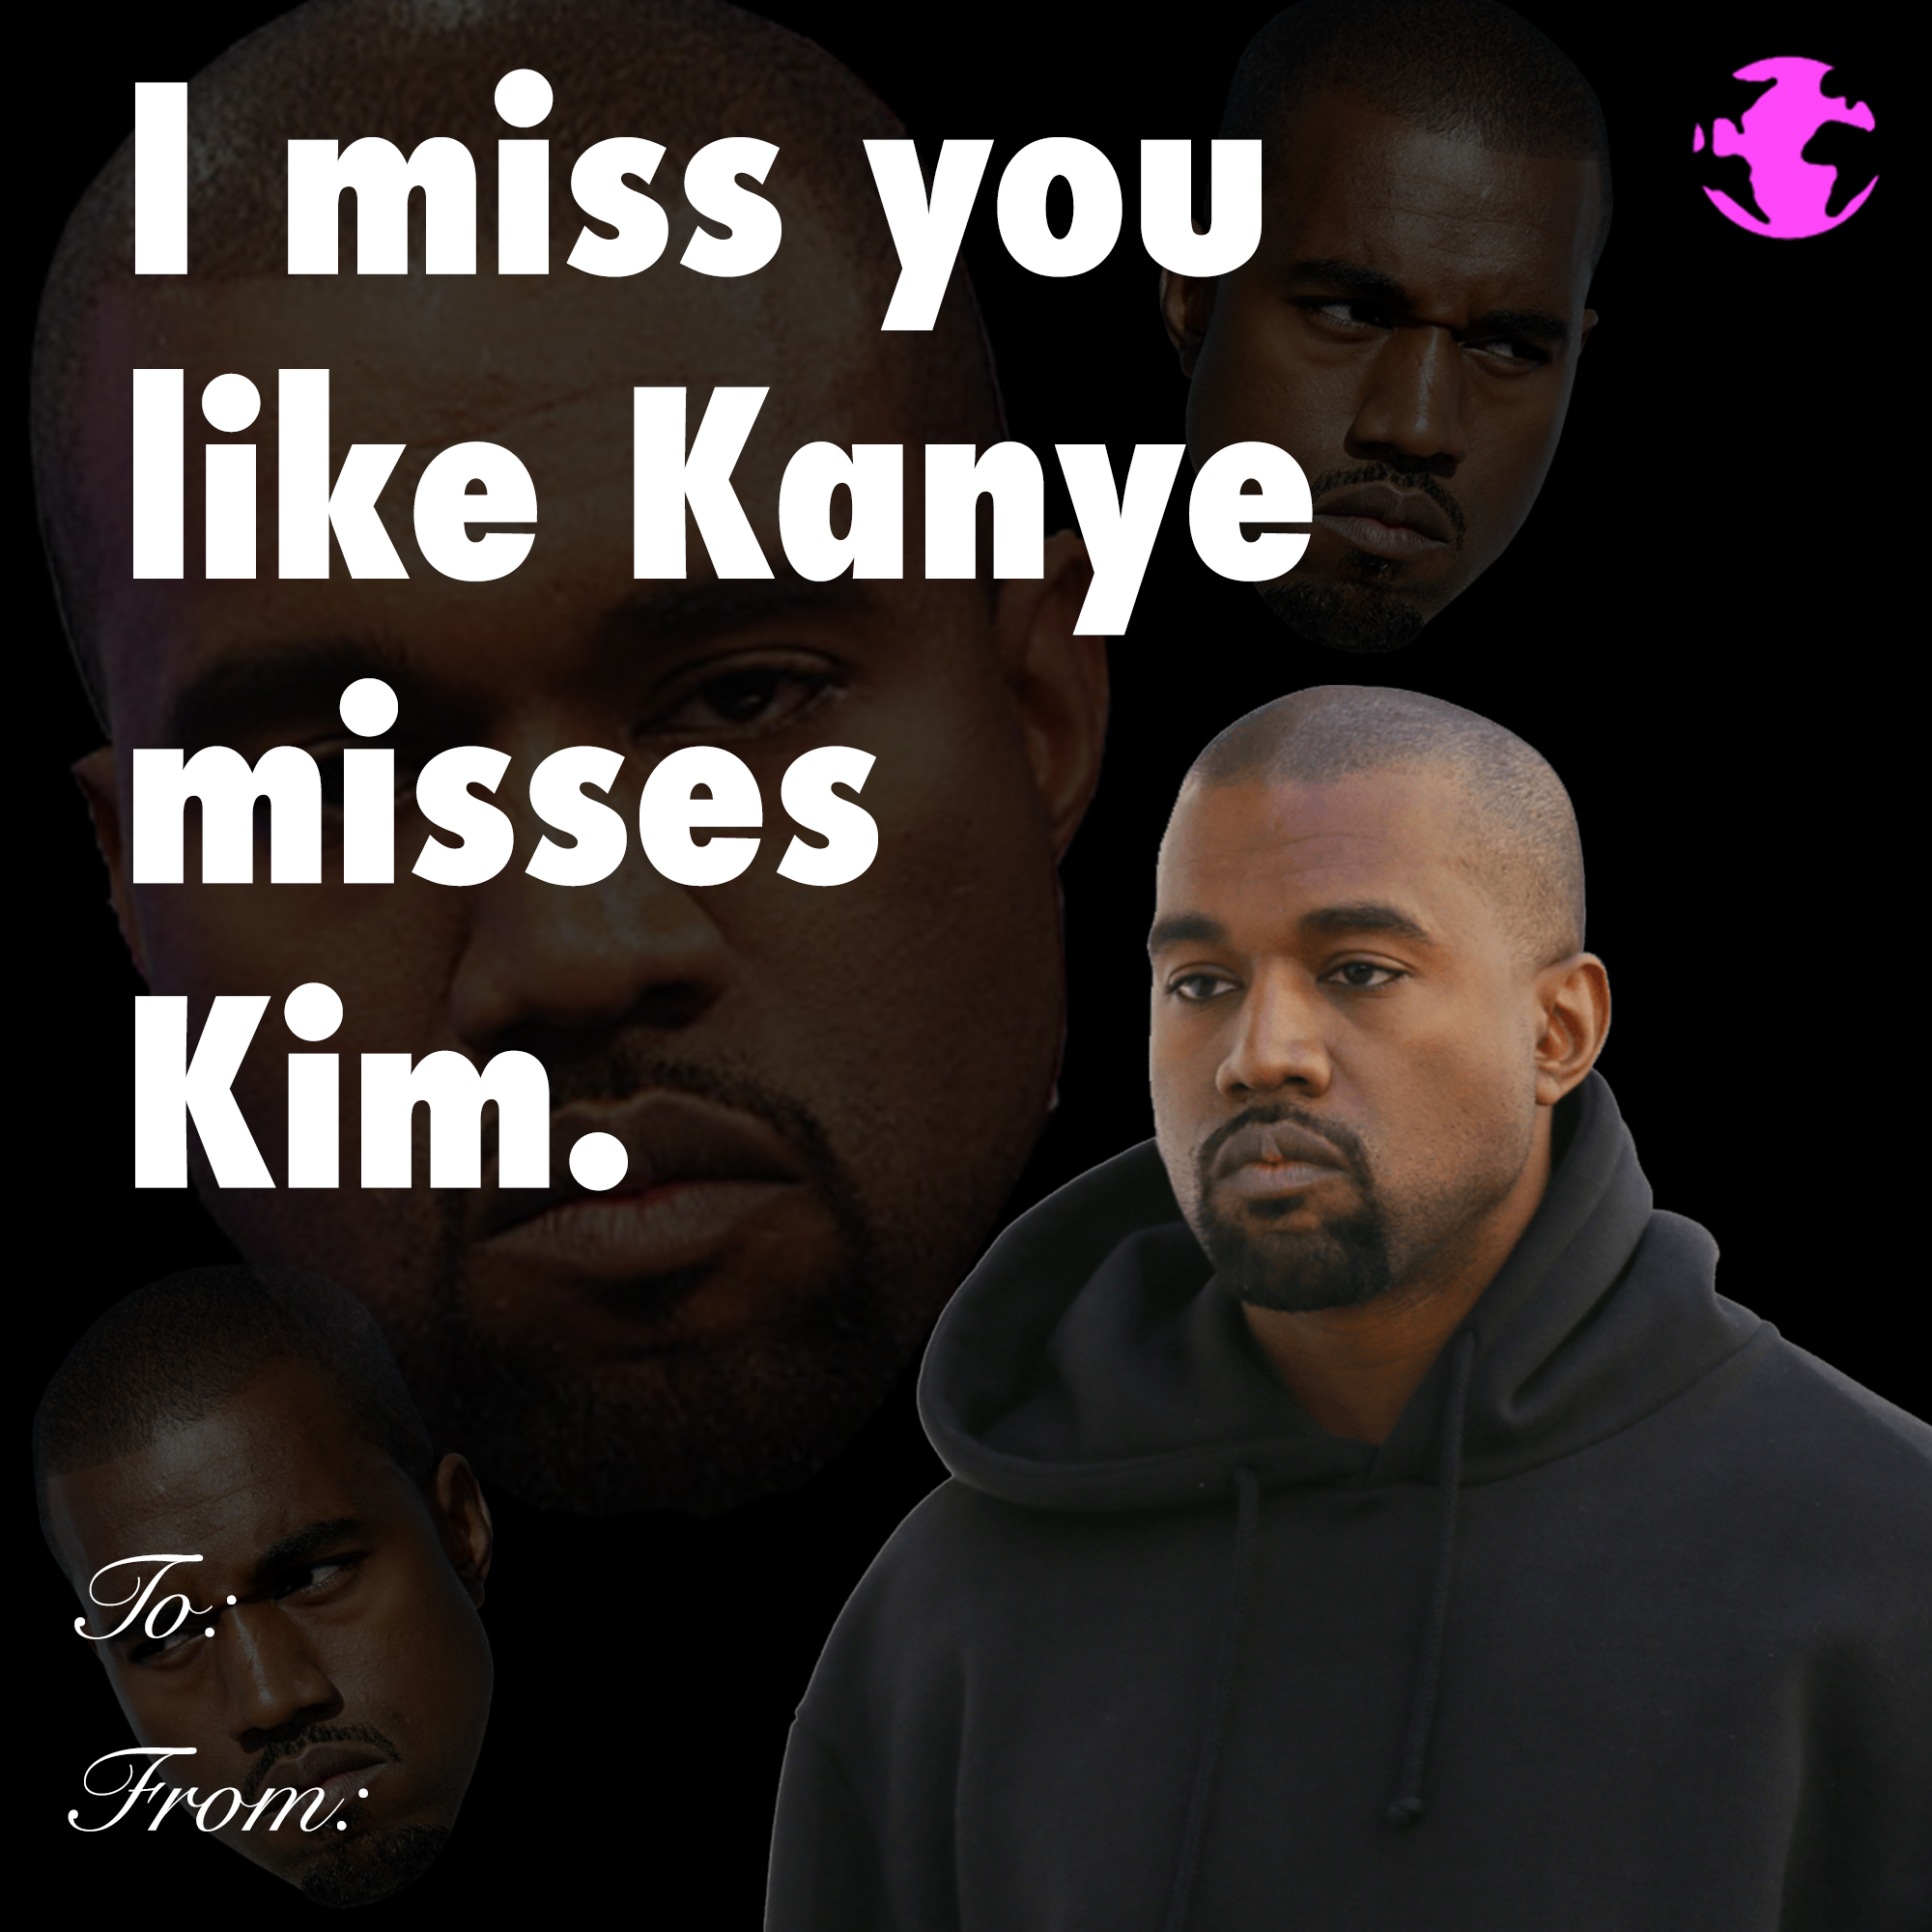 eBaum's Valentine's Day Cards 2022 - photo caption - I miss you Kanye misses Km. To From